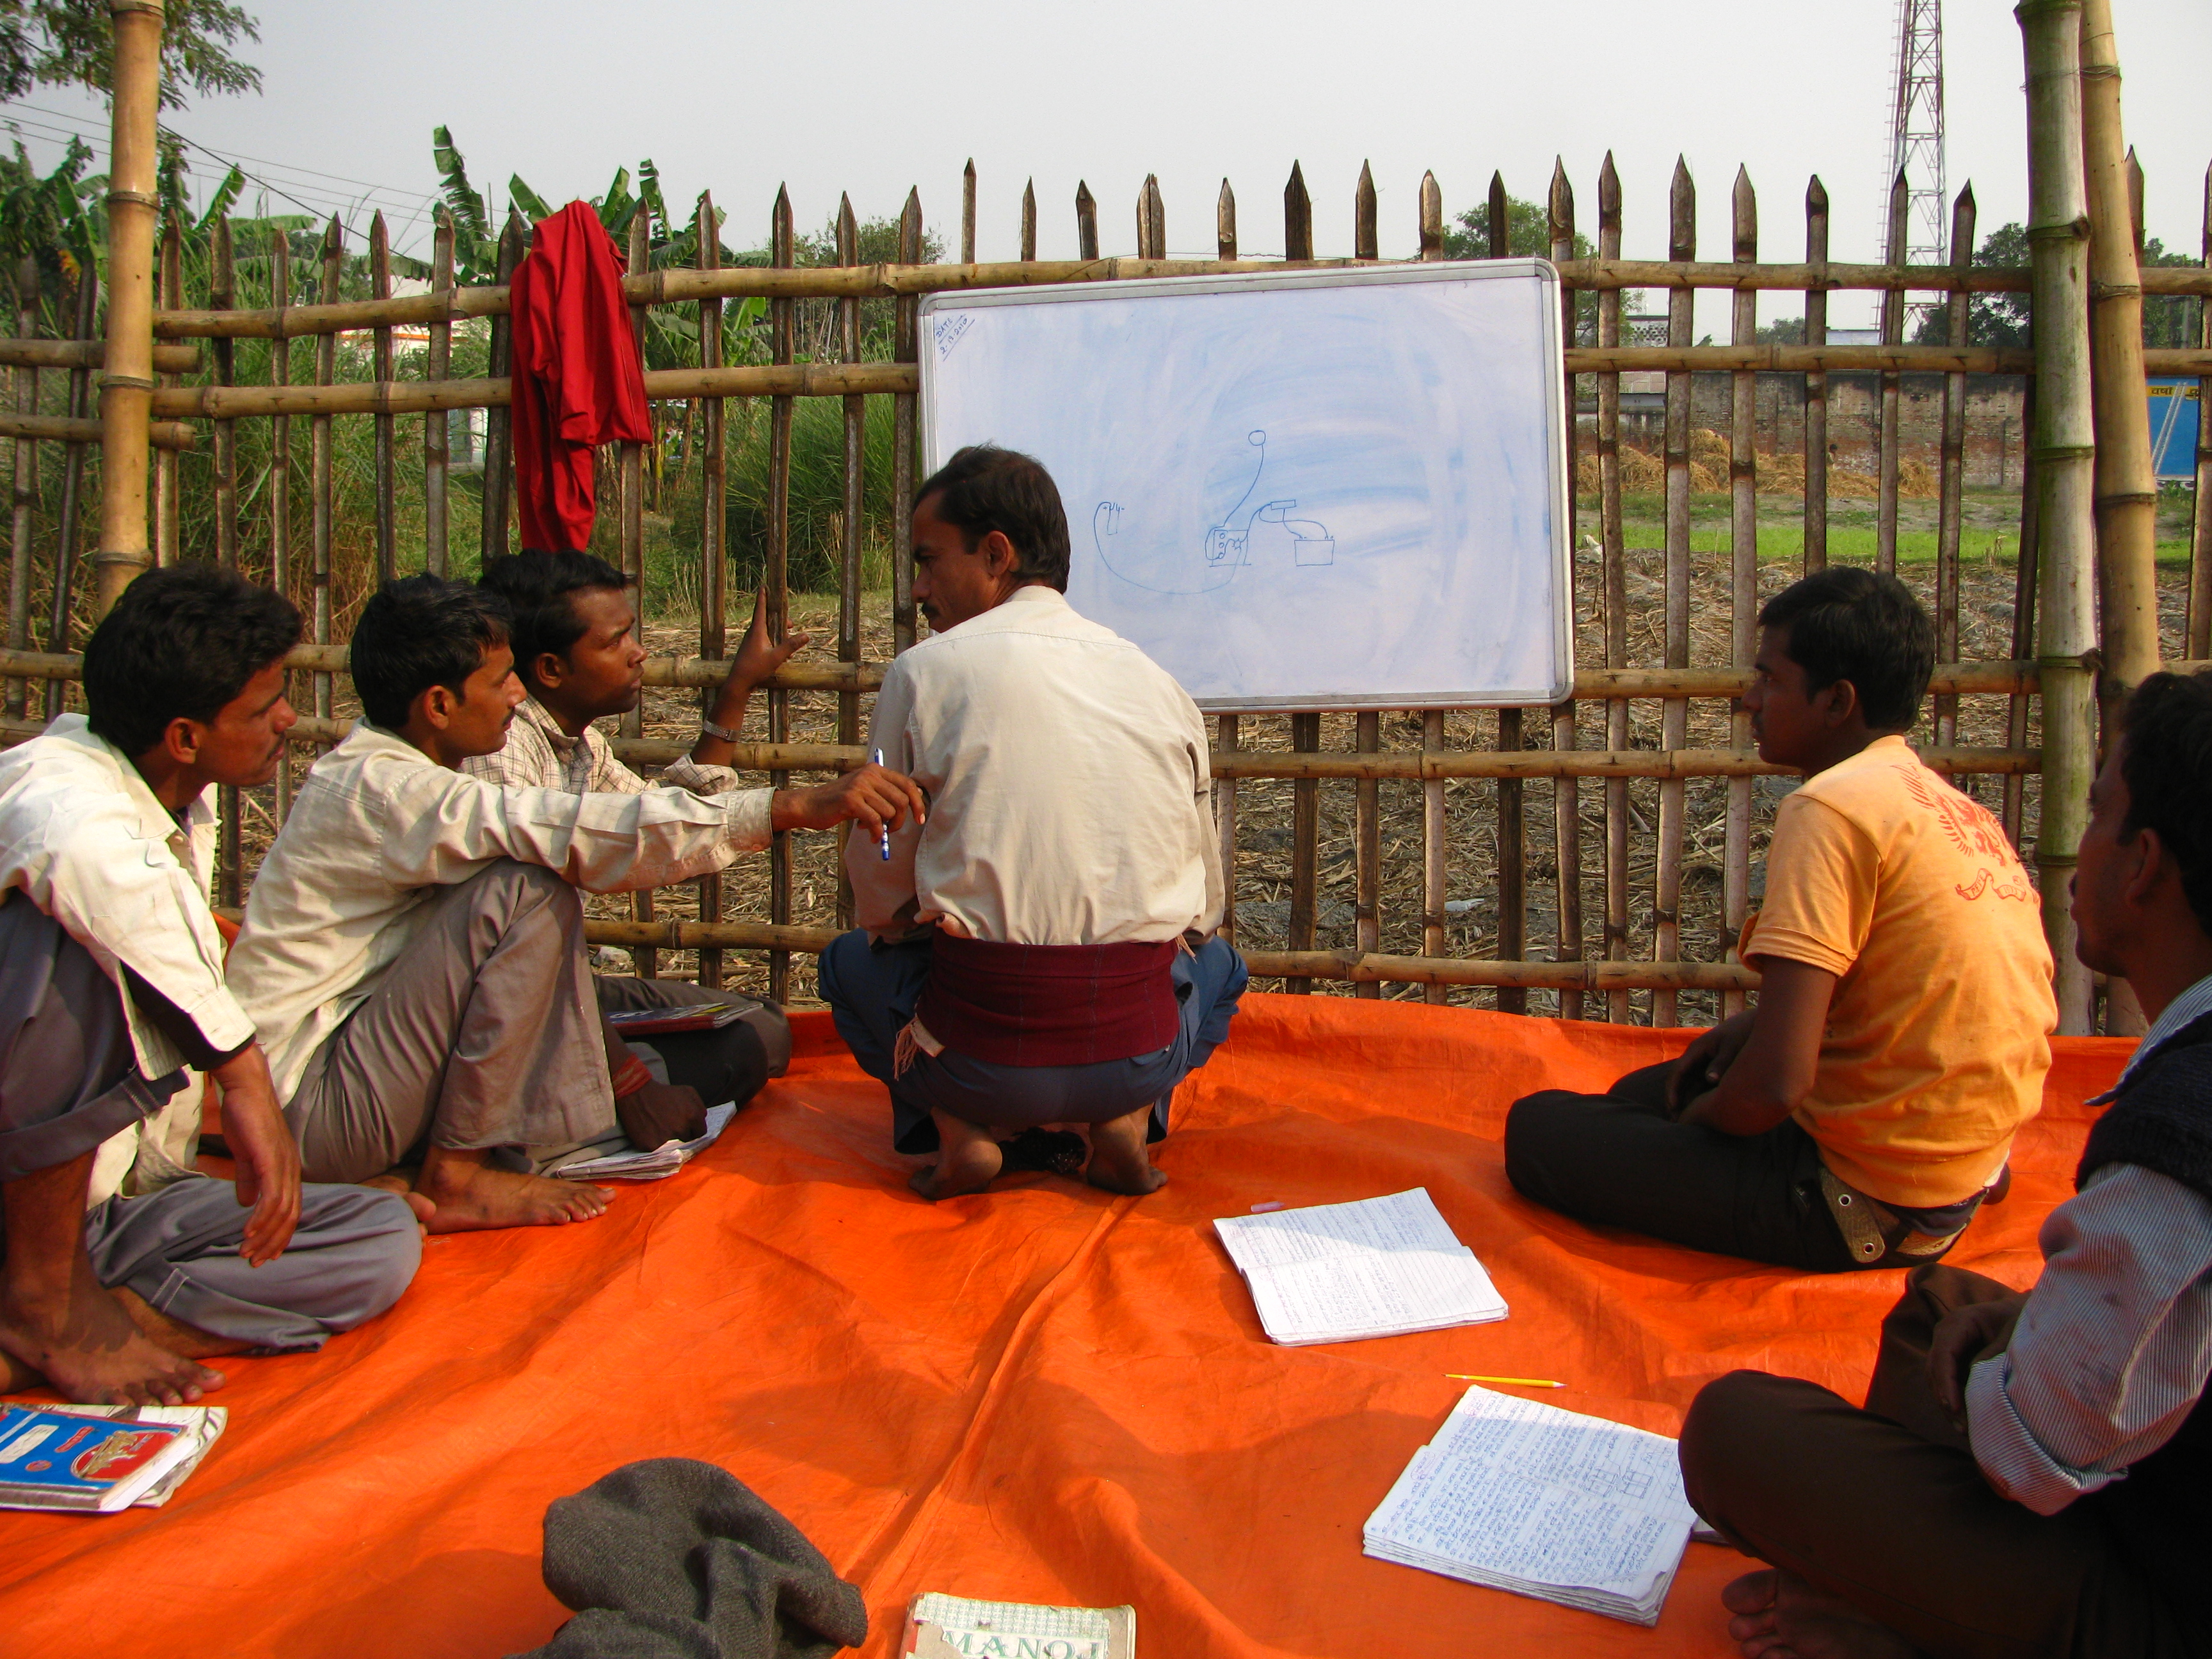 People sitting on a tarp, brainstorming in front of a whiteboard outdoors. image link to story